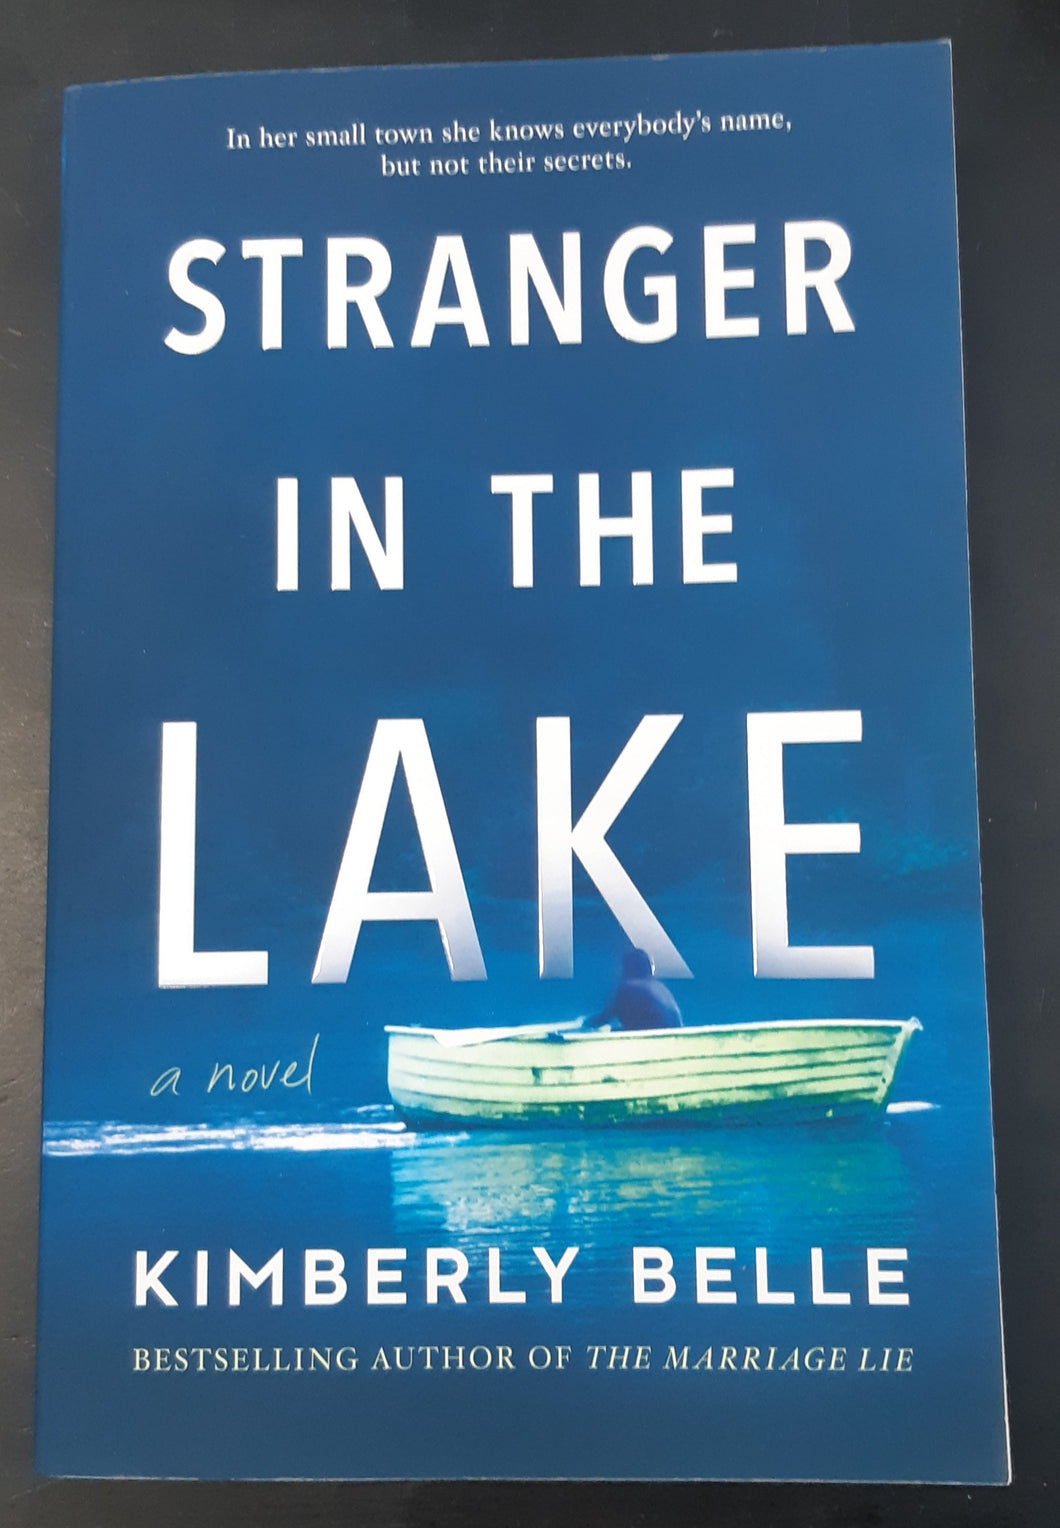 Stranger in the Lake by Kimberly Belle